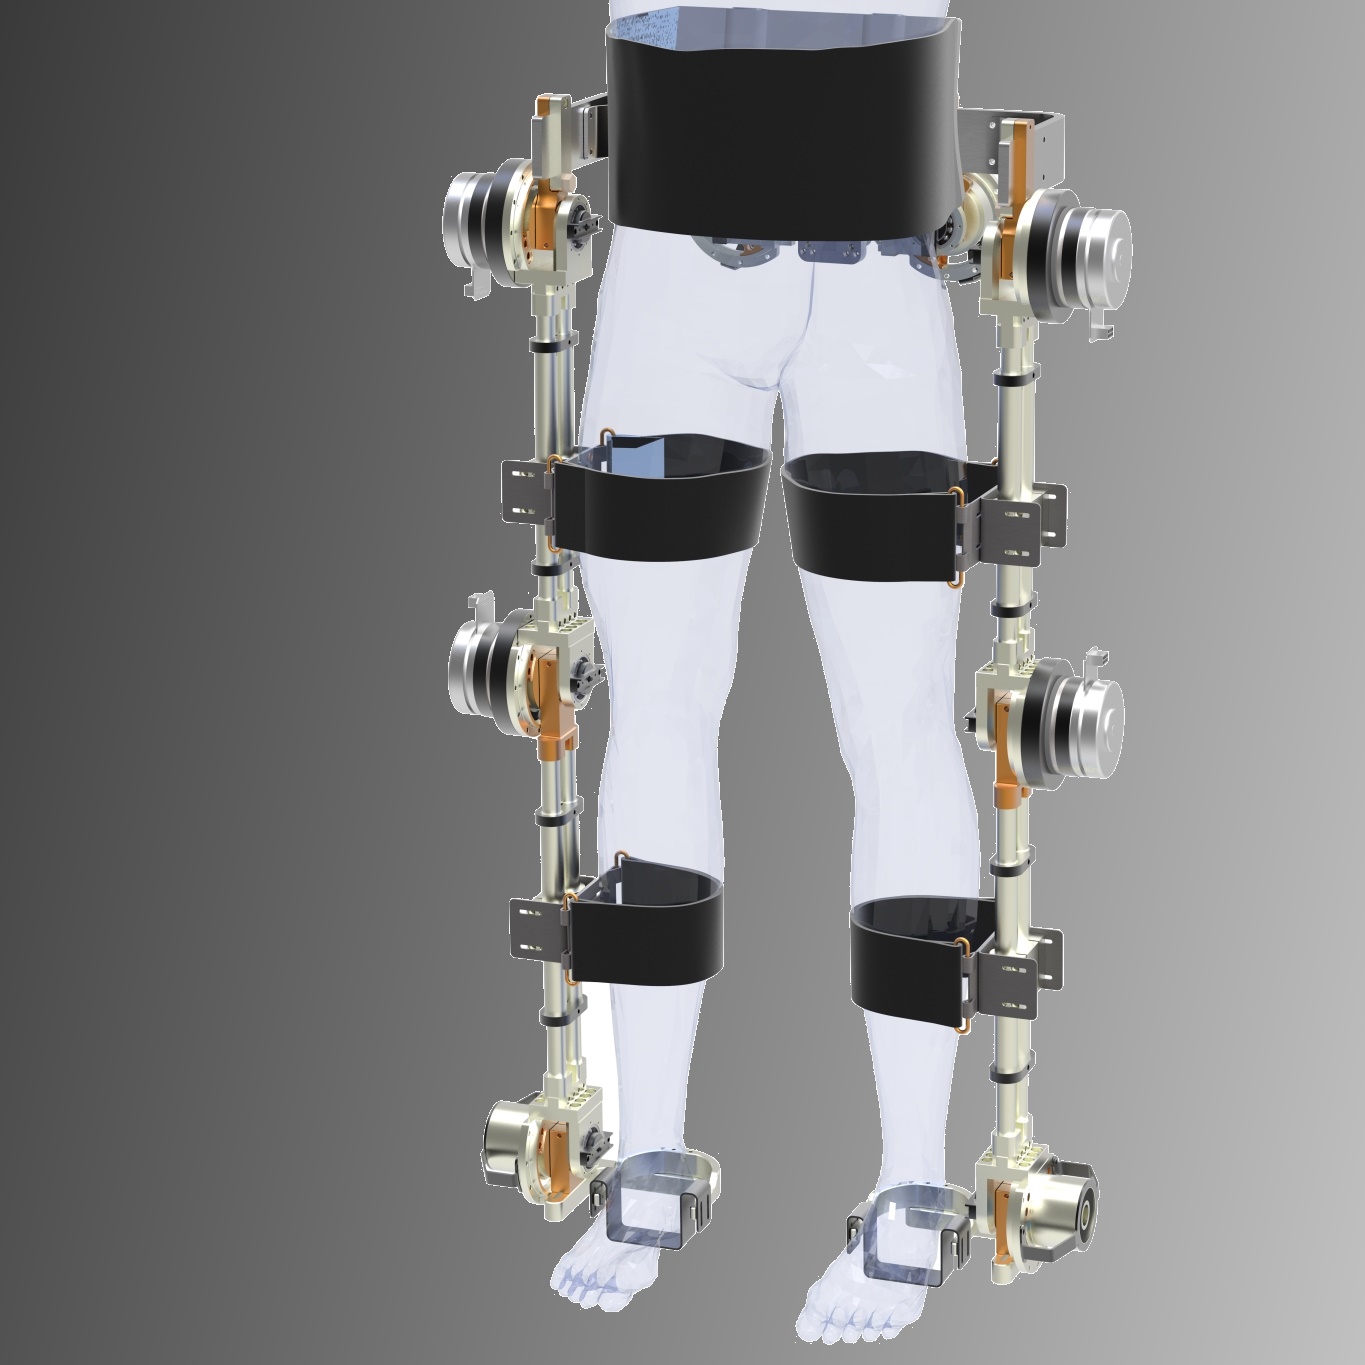 Enlarged view: a fully articulated lower limb exoskeleton create out of the components of the modular exoskeleton